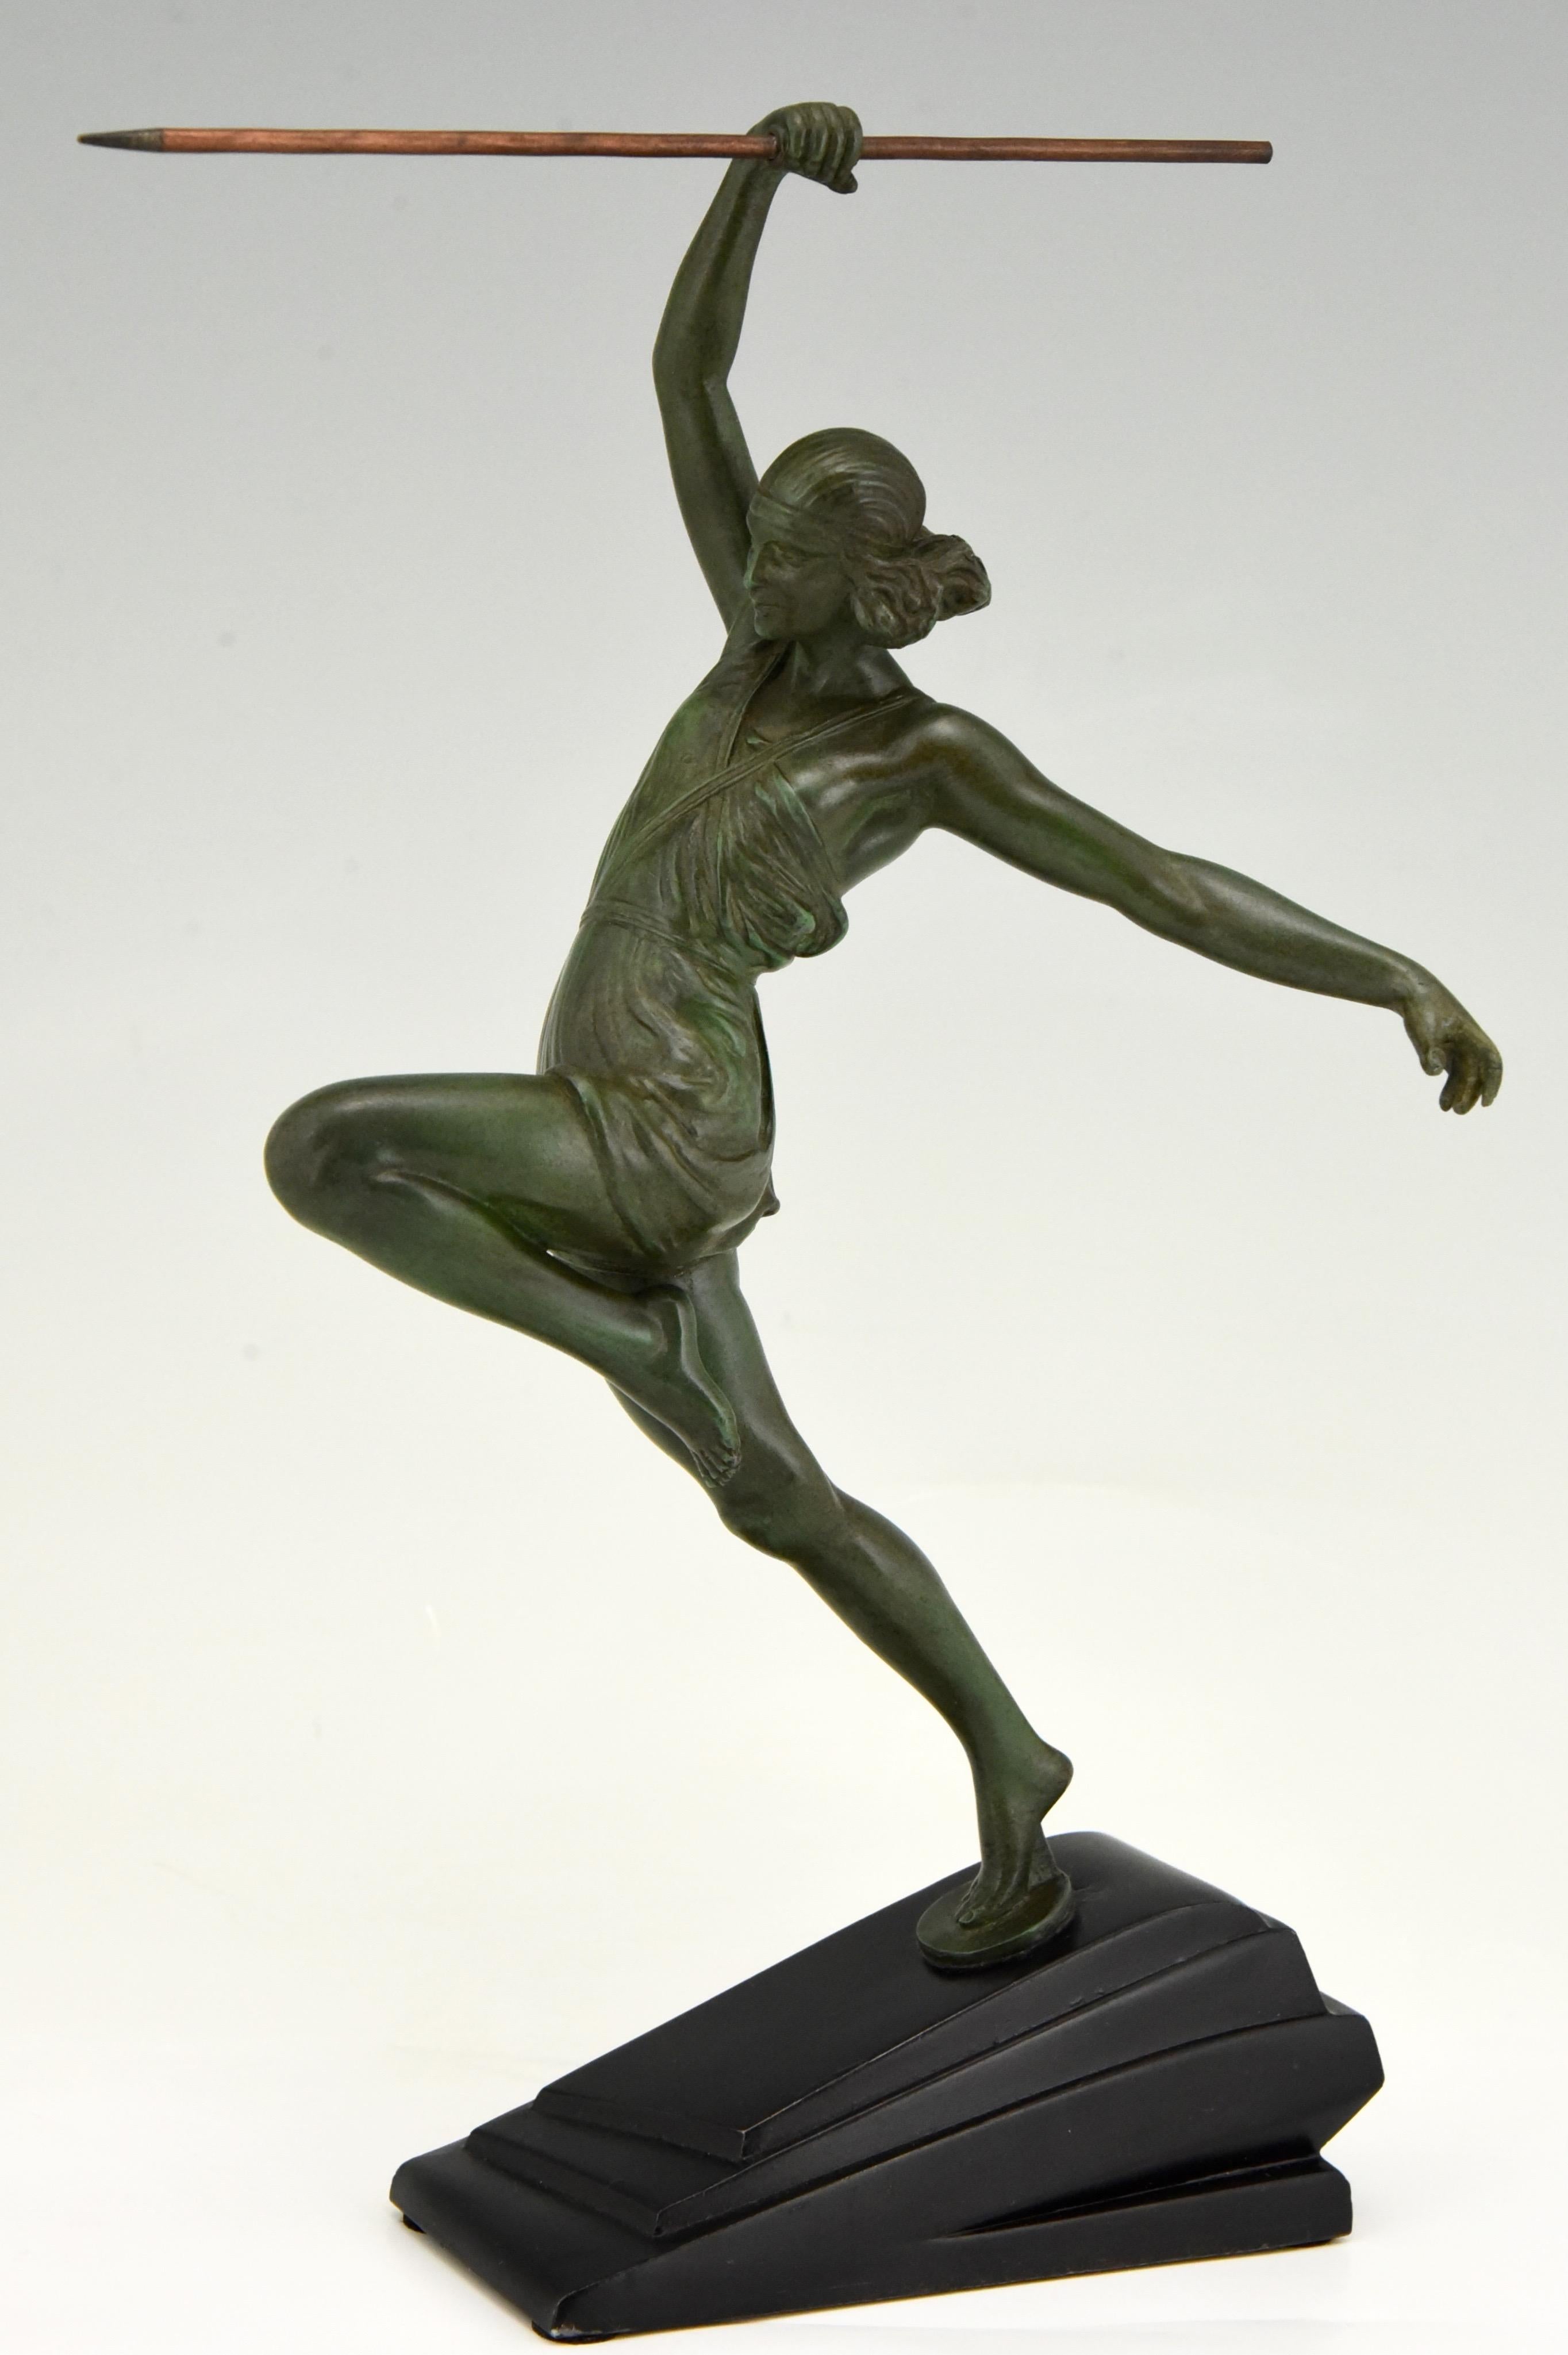 Very nice Art Deco sculpture of a female javelin thrower on a black metal base signed by Fayral, pseudonym of Pierre Le Faguays, France, 1930.
Literature:
“Bronzes, sculptors and founders” by H. Berman, Abage. “Art deco sculpture” by Victor Arwas,